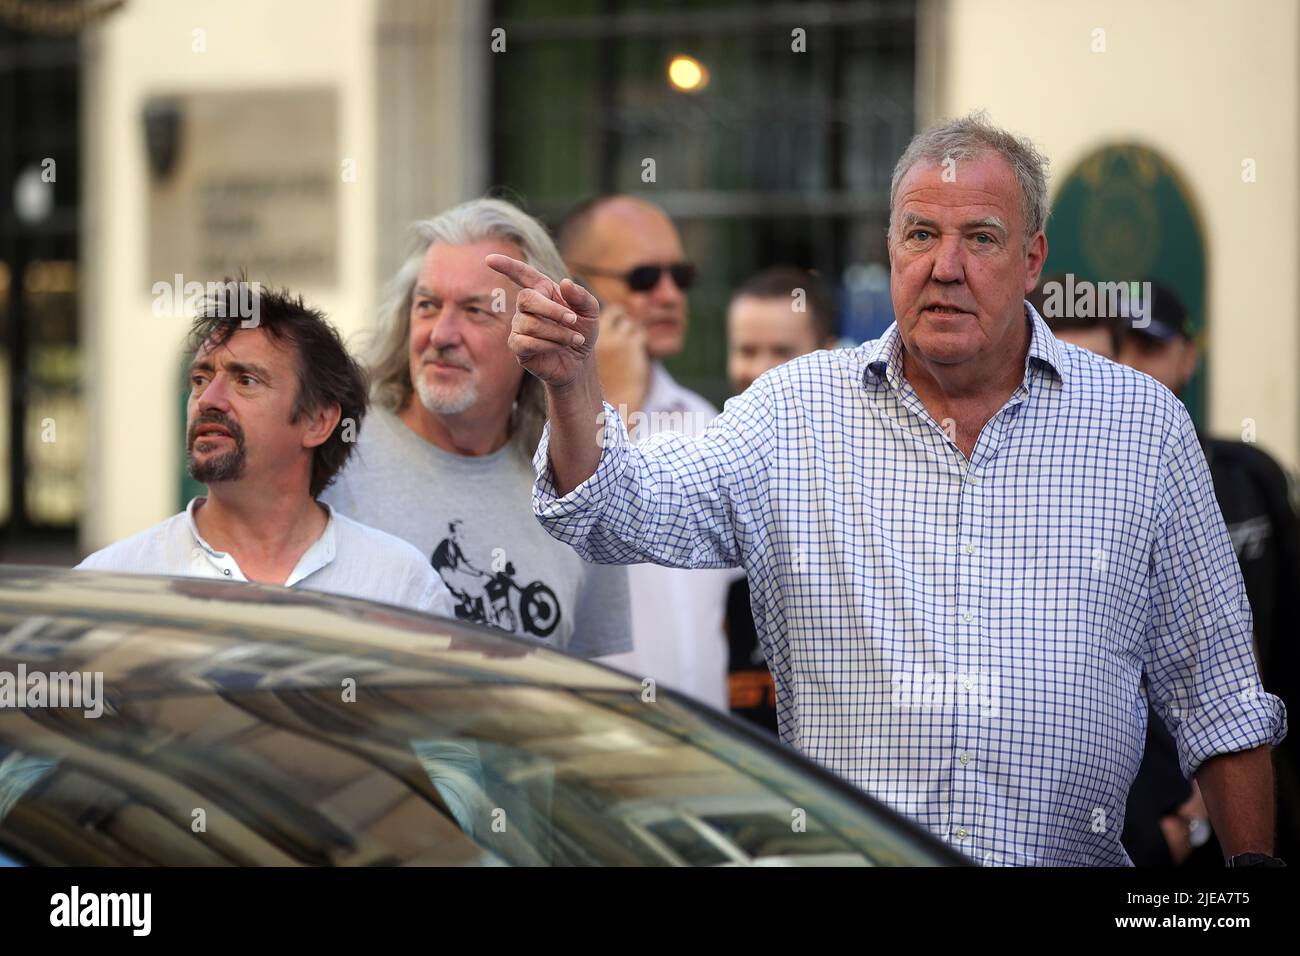 Krakow, Poland. 24th June, 2022. The Grand Tour stars, Jeremy Clarkson,  Richard Hammond and James May, visit Cracow, Poland, while on tour filming  the show. The Grand Tour is a British motoring